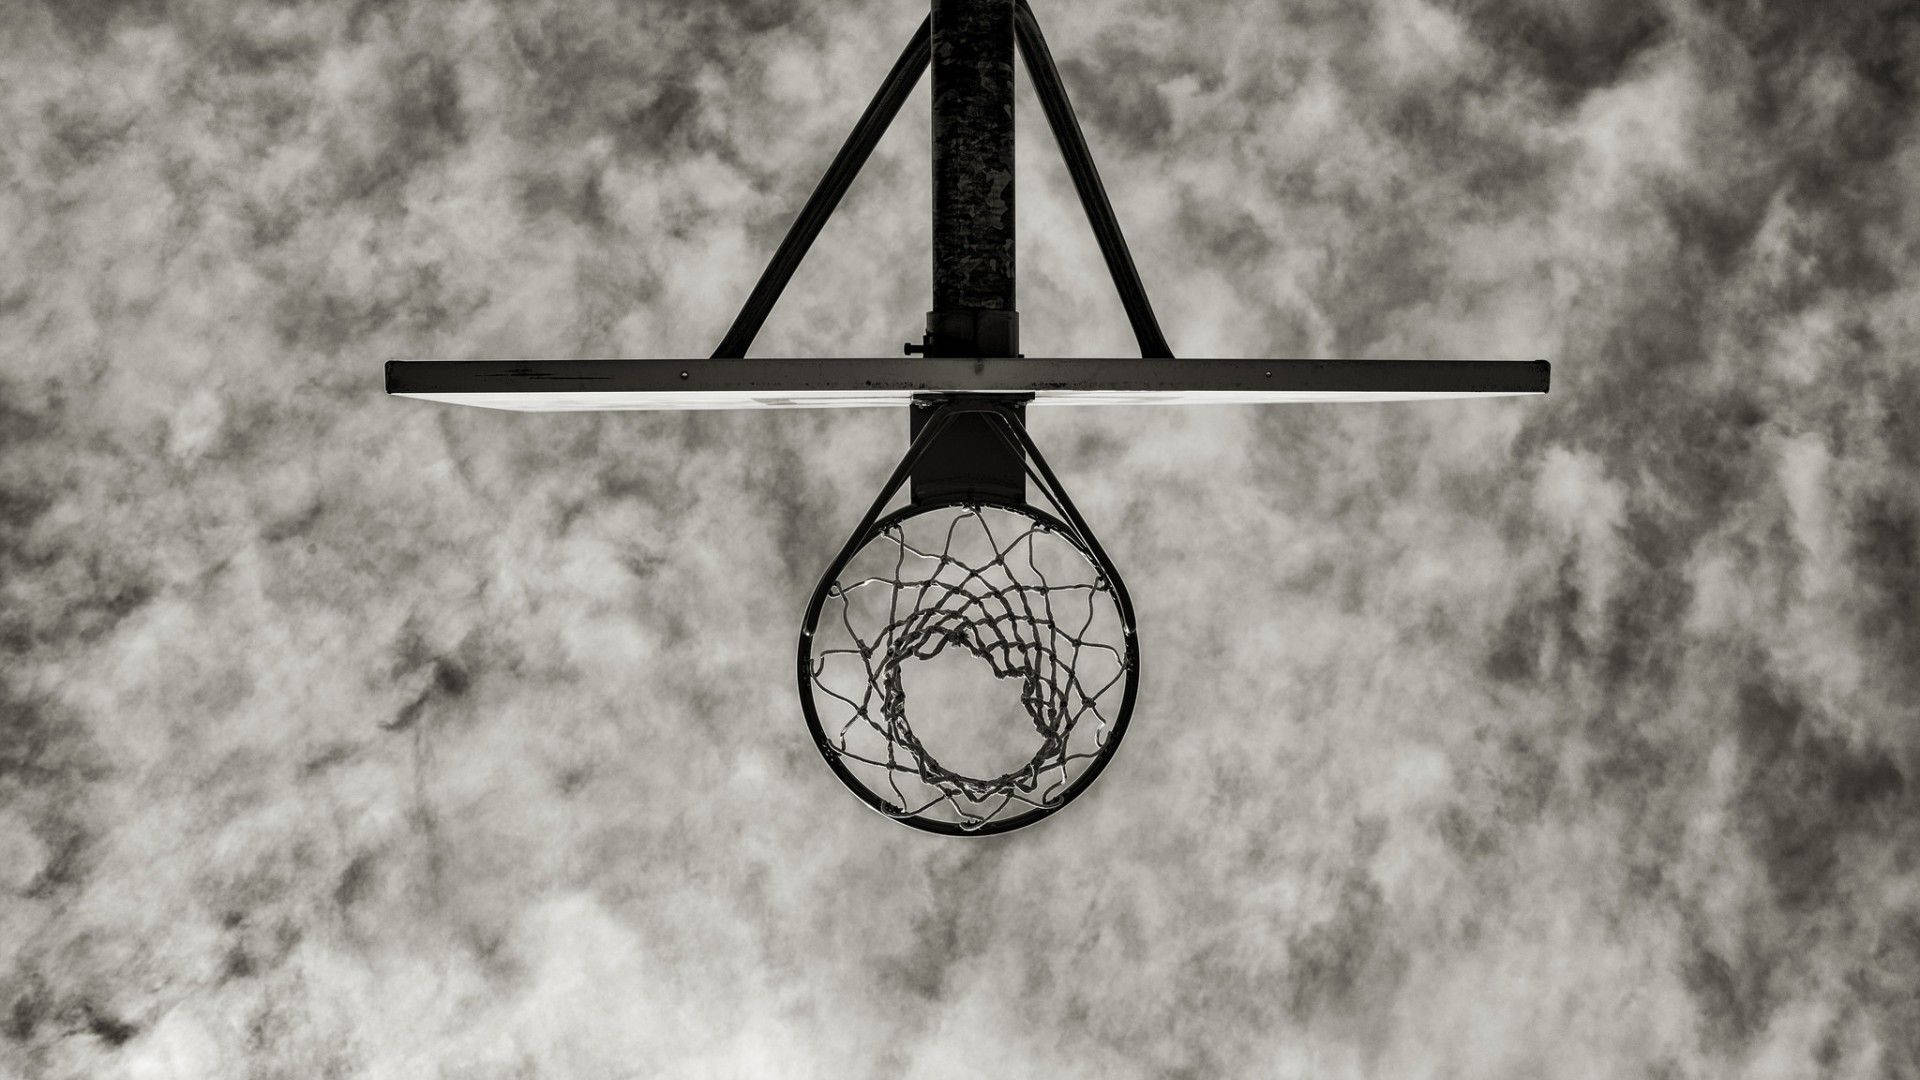 "Set your goals high, just like this basketball hoop!" Wallpaper